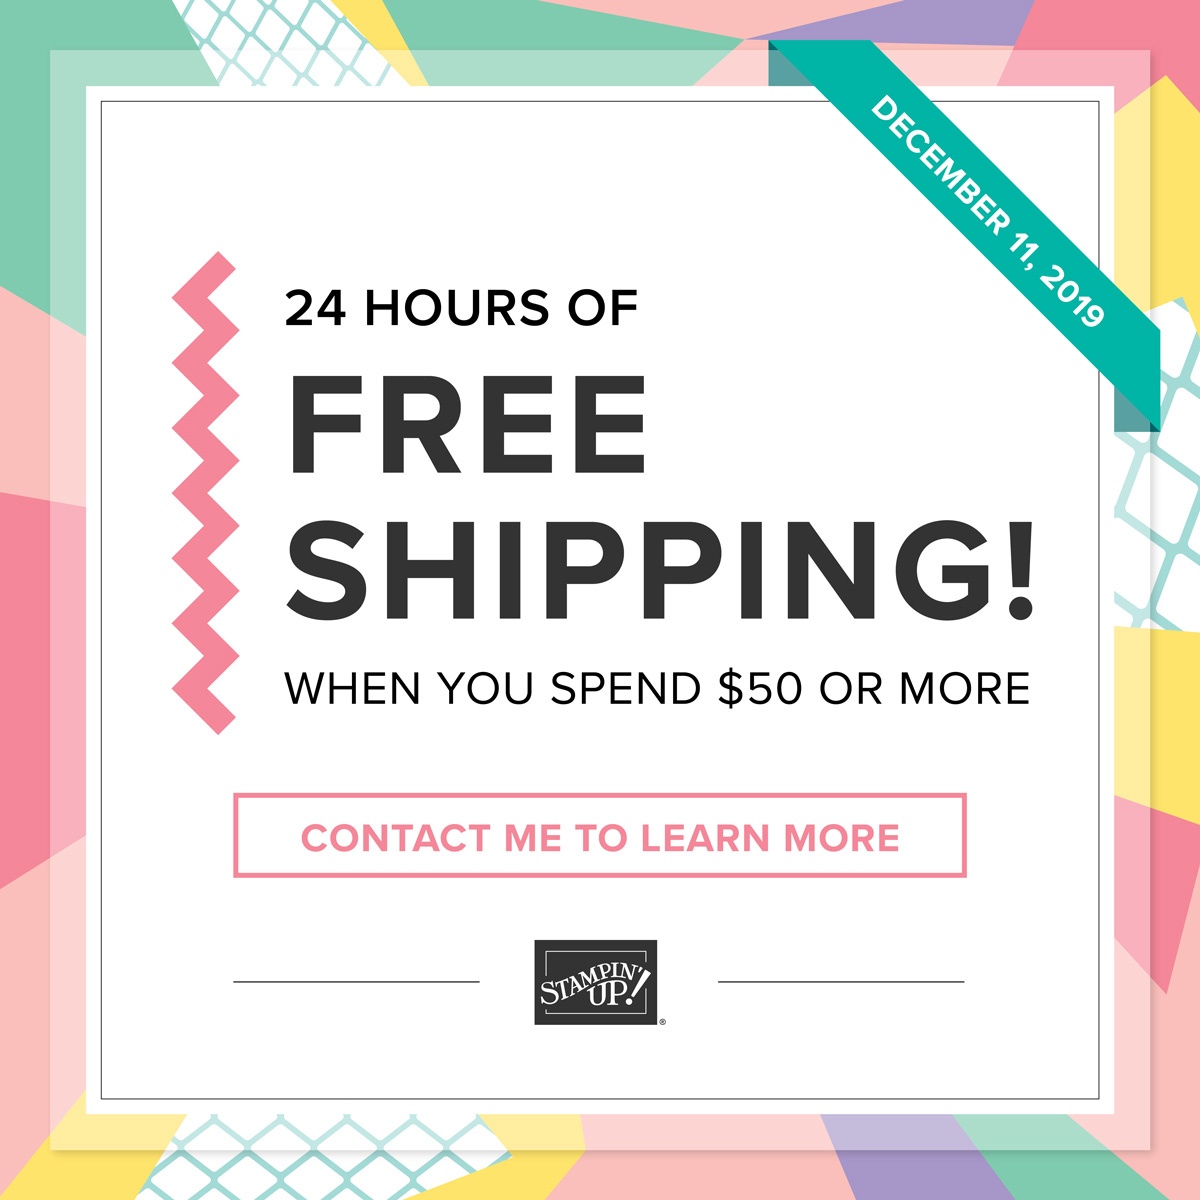 FREE Shipping Dec. 11, 2019 ONLY MIn. $50.00 order before shipping and tax.  Visit my blog for details: https://wp.me/p59VWq-aCb